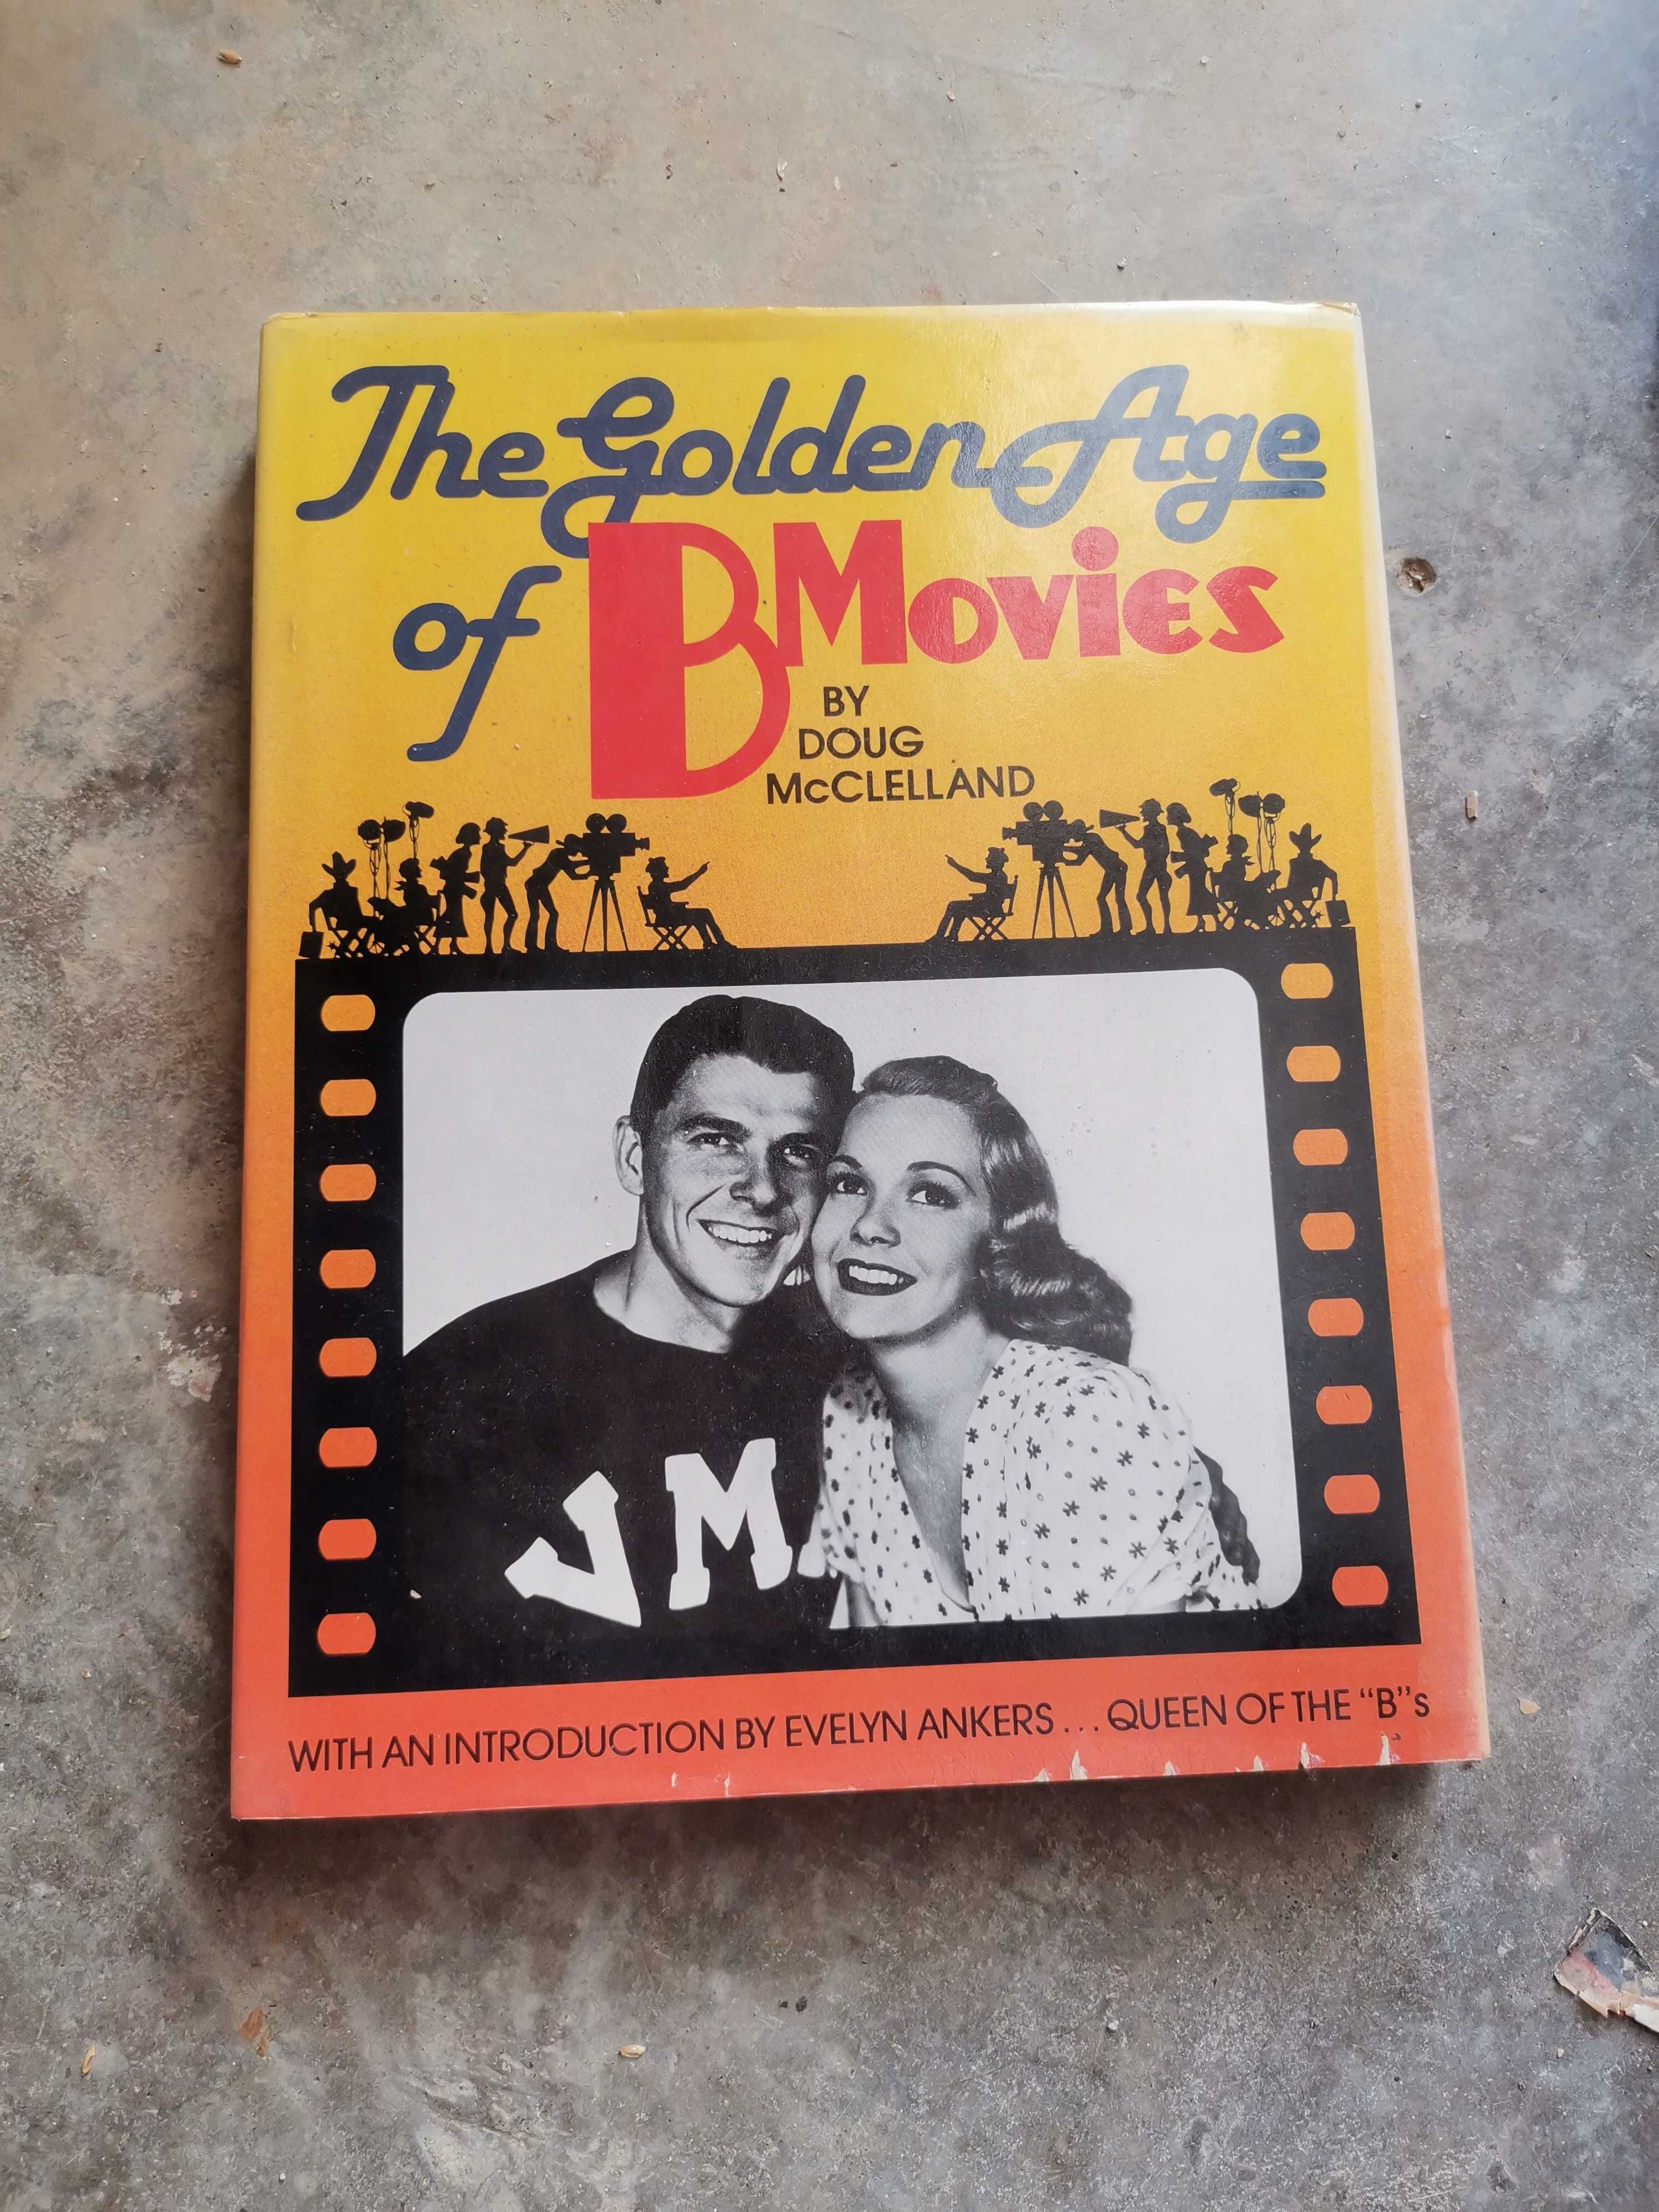 Livro The Golden Age of B Movies